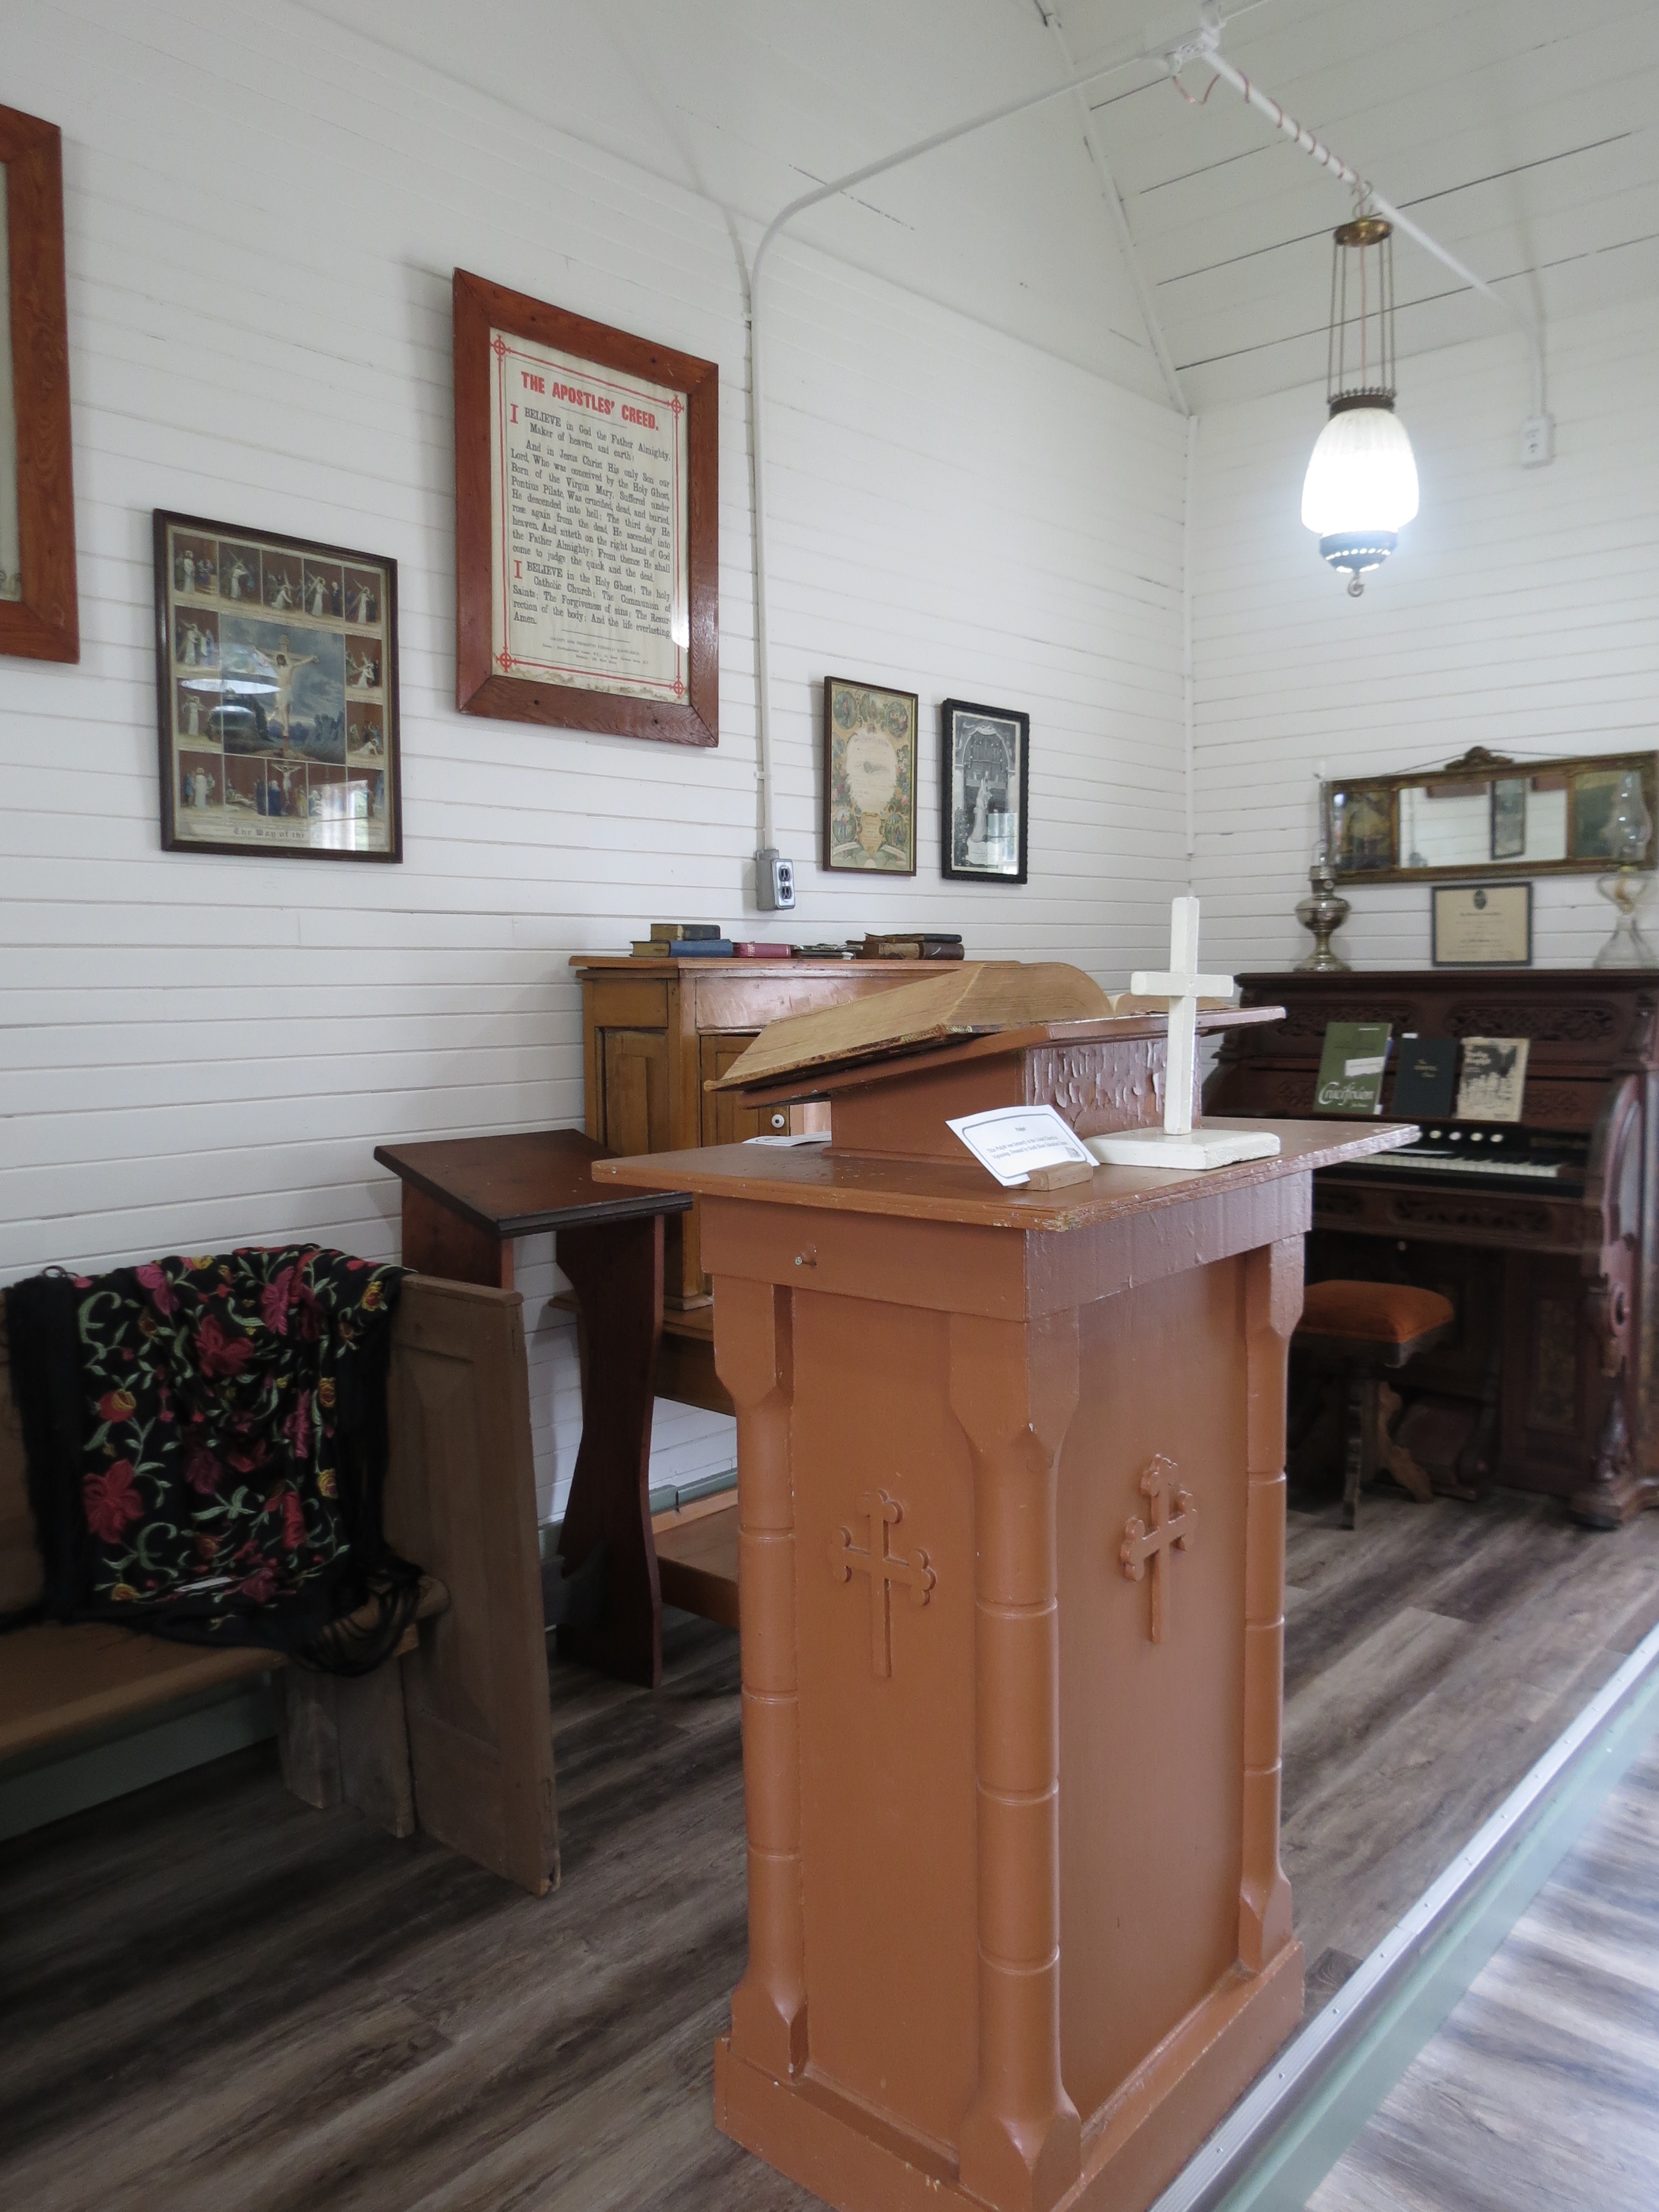 Artifacts in the Nipissing Township Museum, such as an antique wooden church lecturn, organ, and bench.